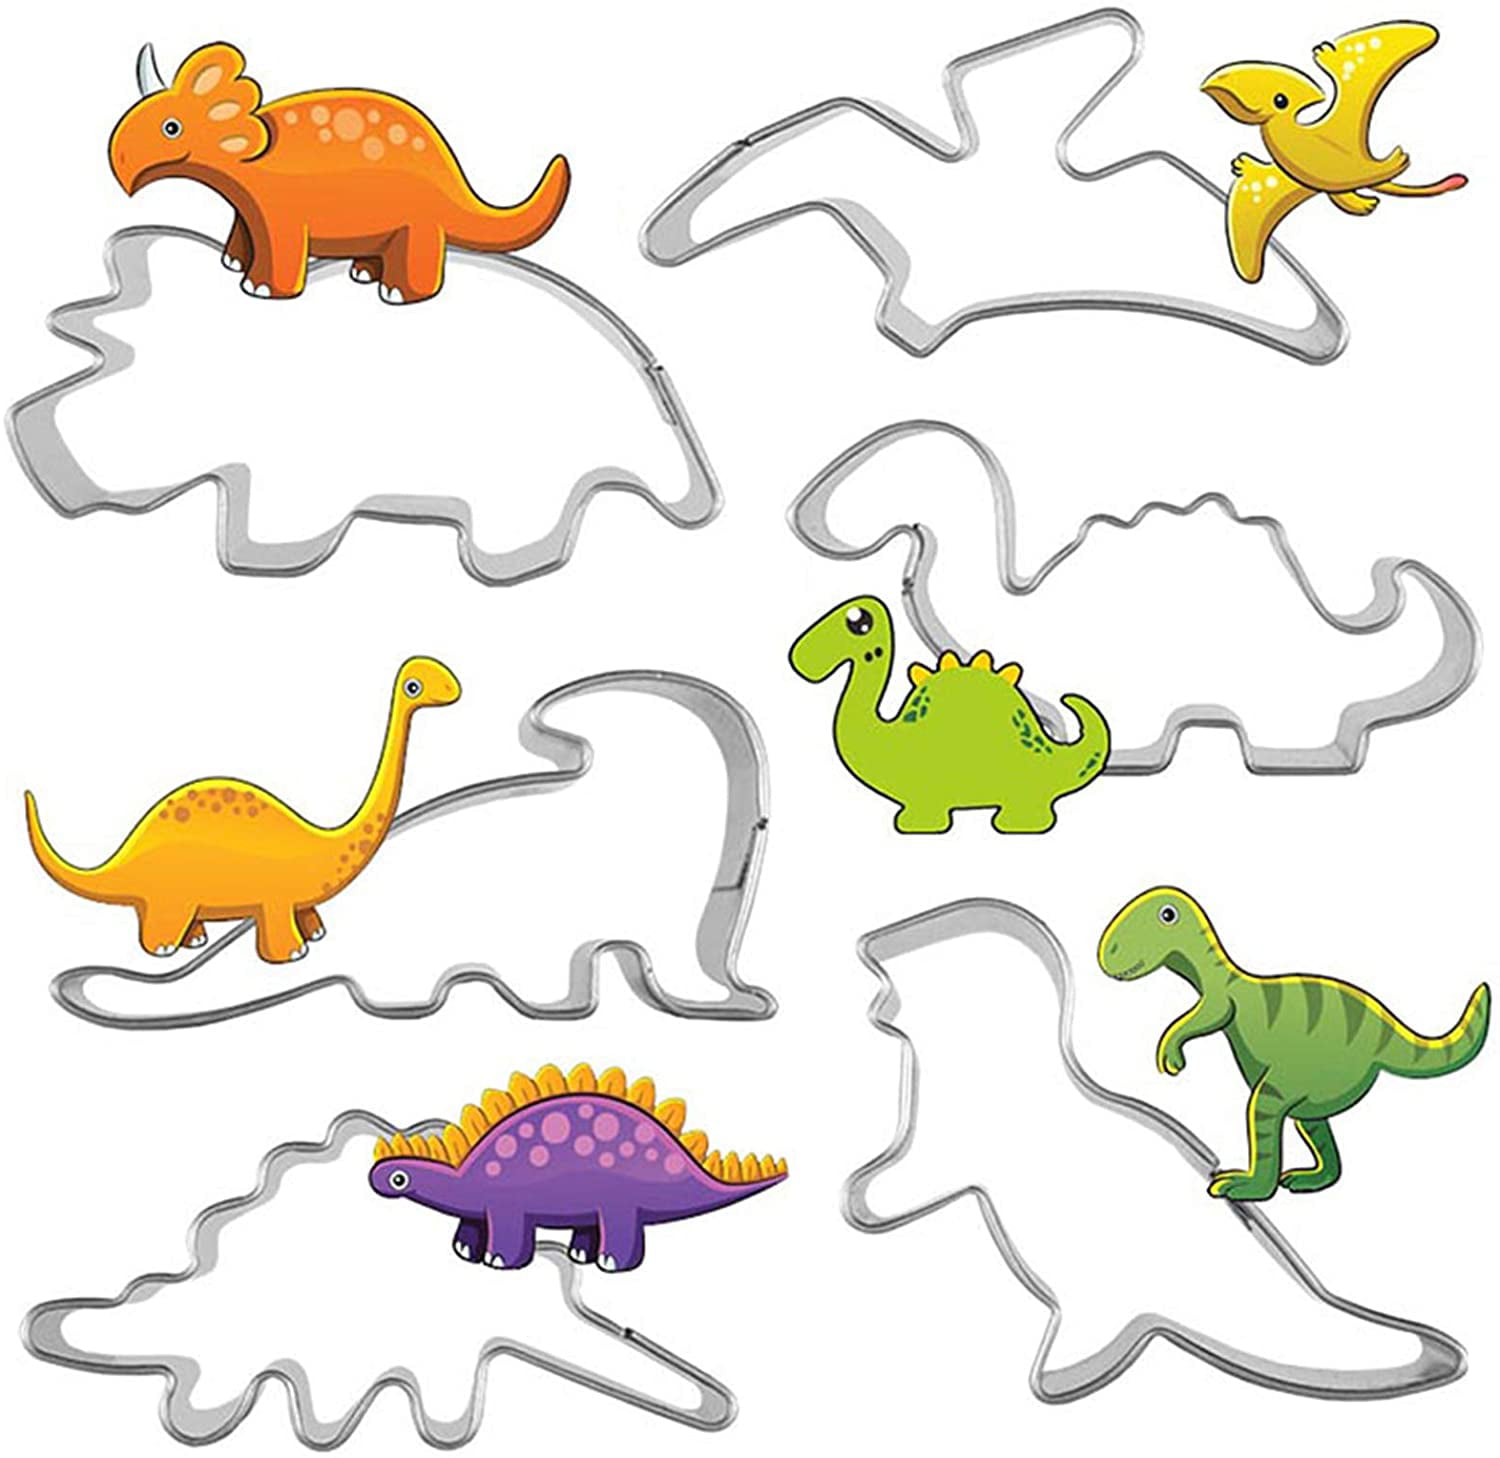 Dinosaur D Stainless Steel Cookies Cutters Cake Baking Biscuit DIY Mould Mold /